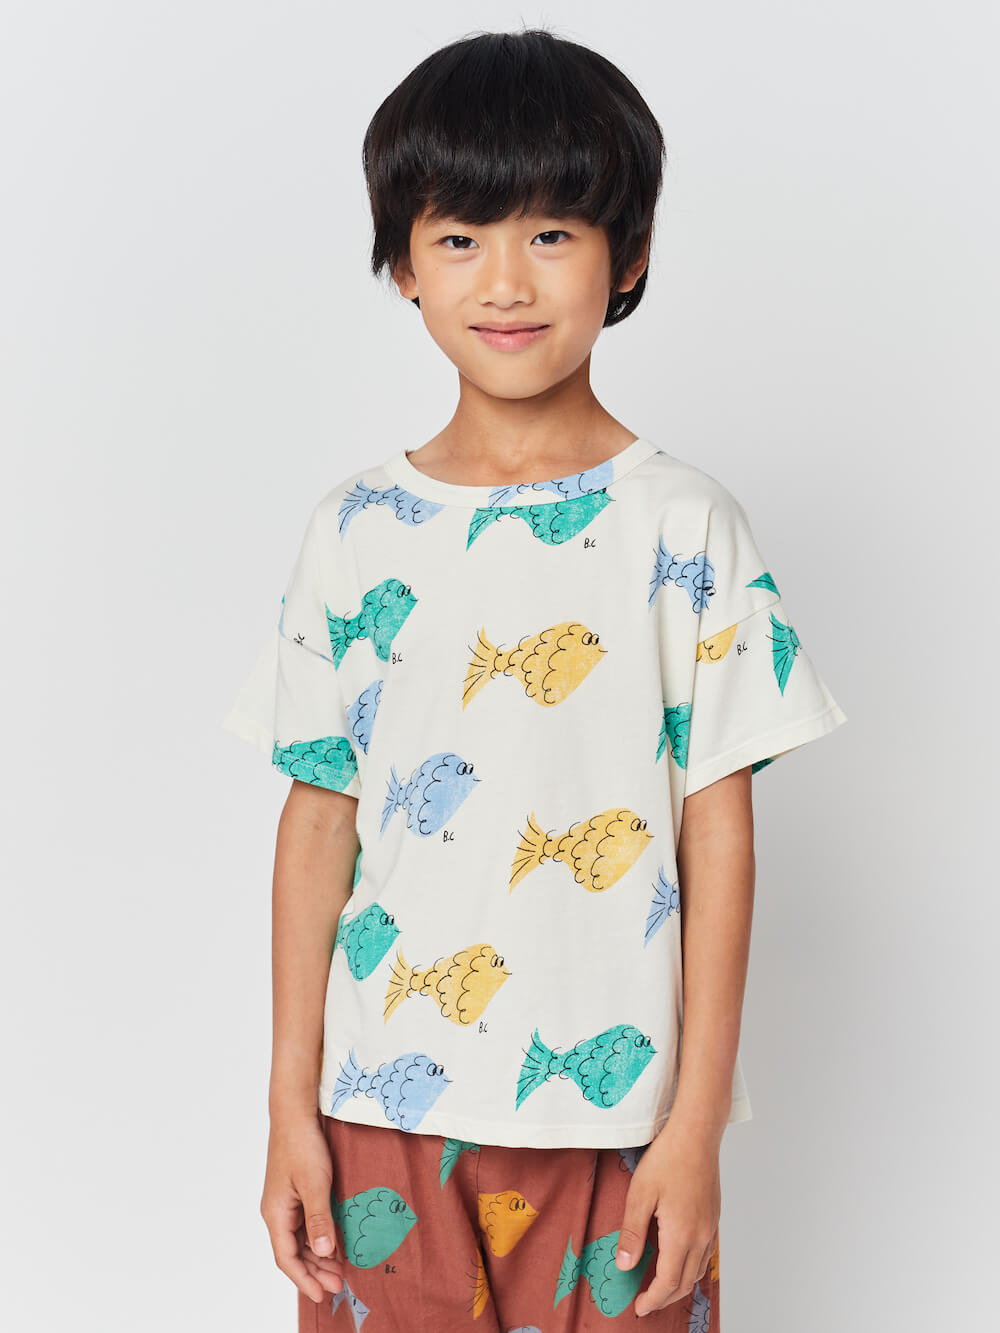 Bobo Choses Multicolour Fish All Over T-Shirt | lincolnstreetwatsonville